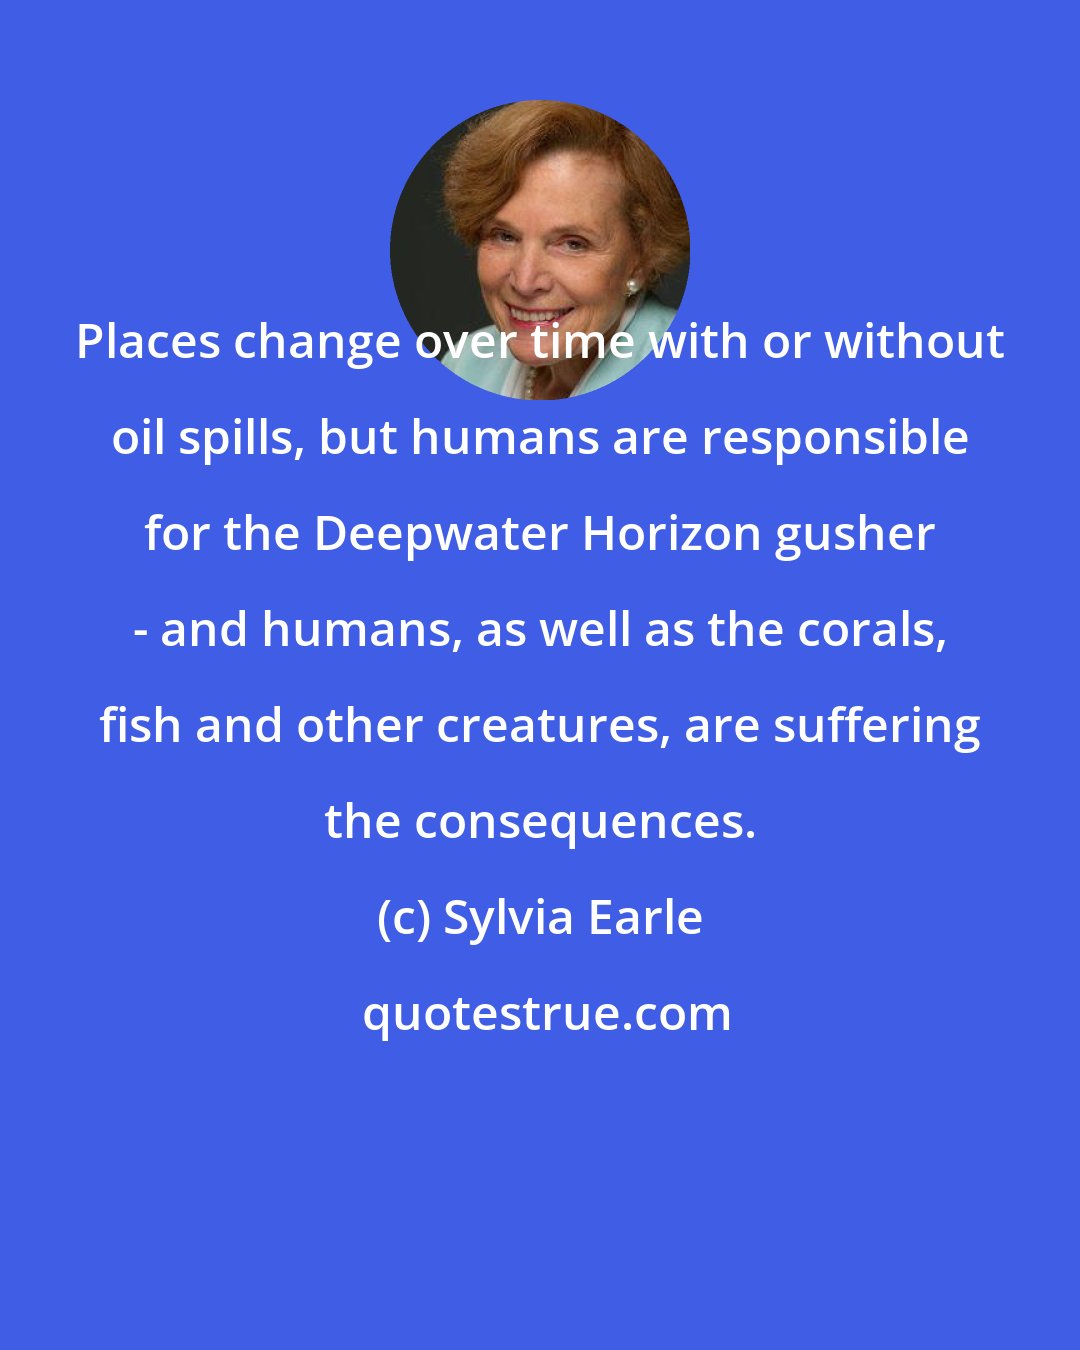 Sylvia Earle: Places change over time with or without oil spills, but humans are responsible for the Deepwater Horizon gusher - and humans, as well as the corals, fish and other creatures, are suffering the consequences.